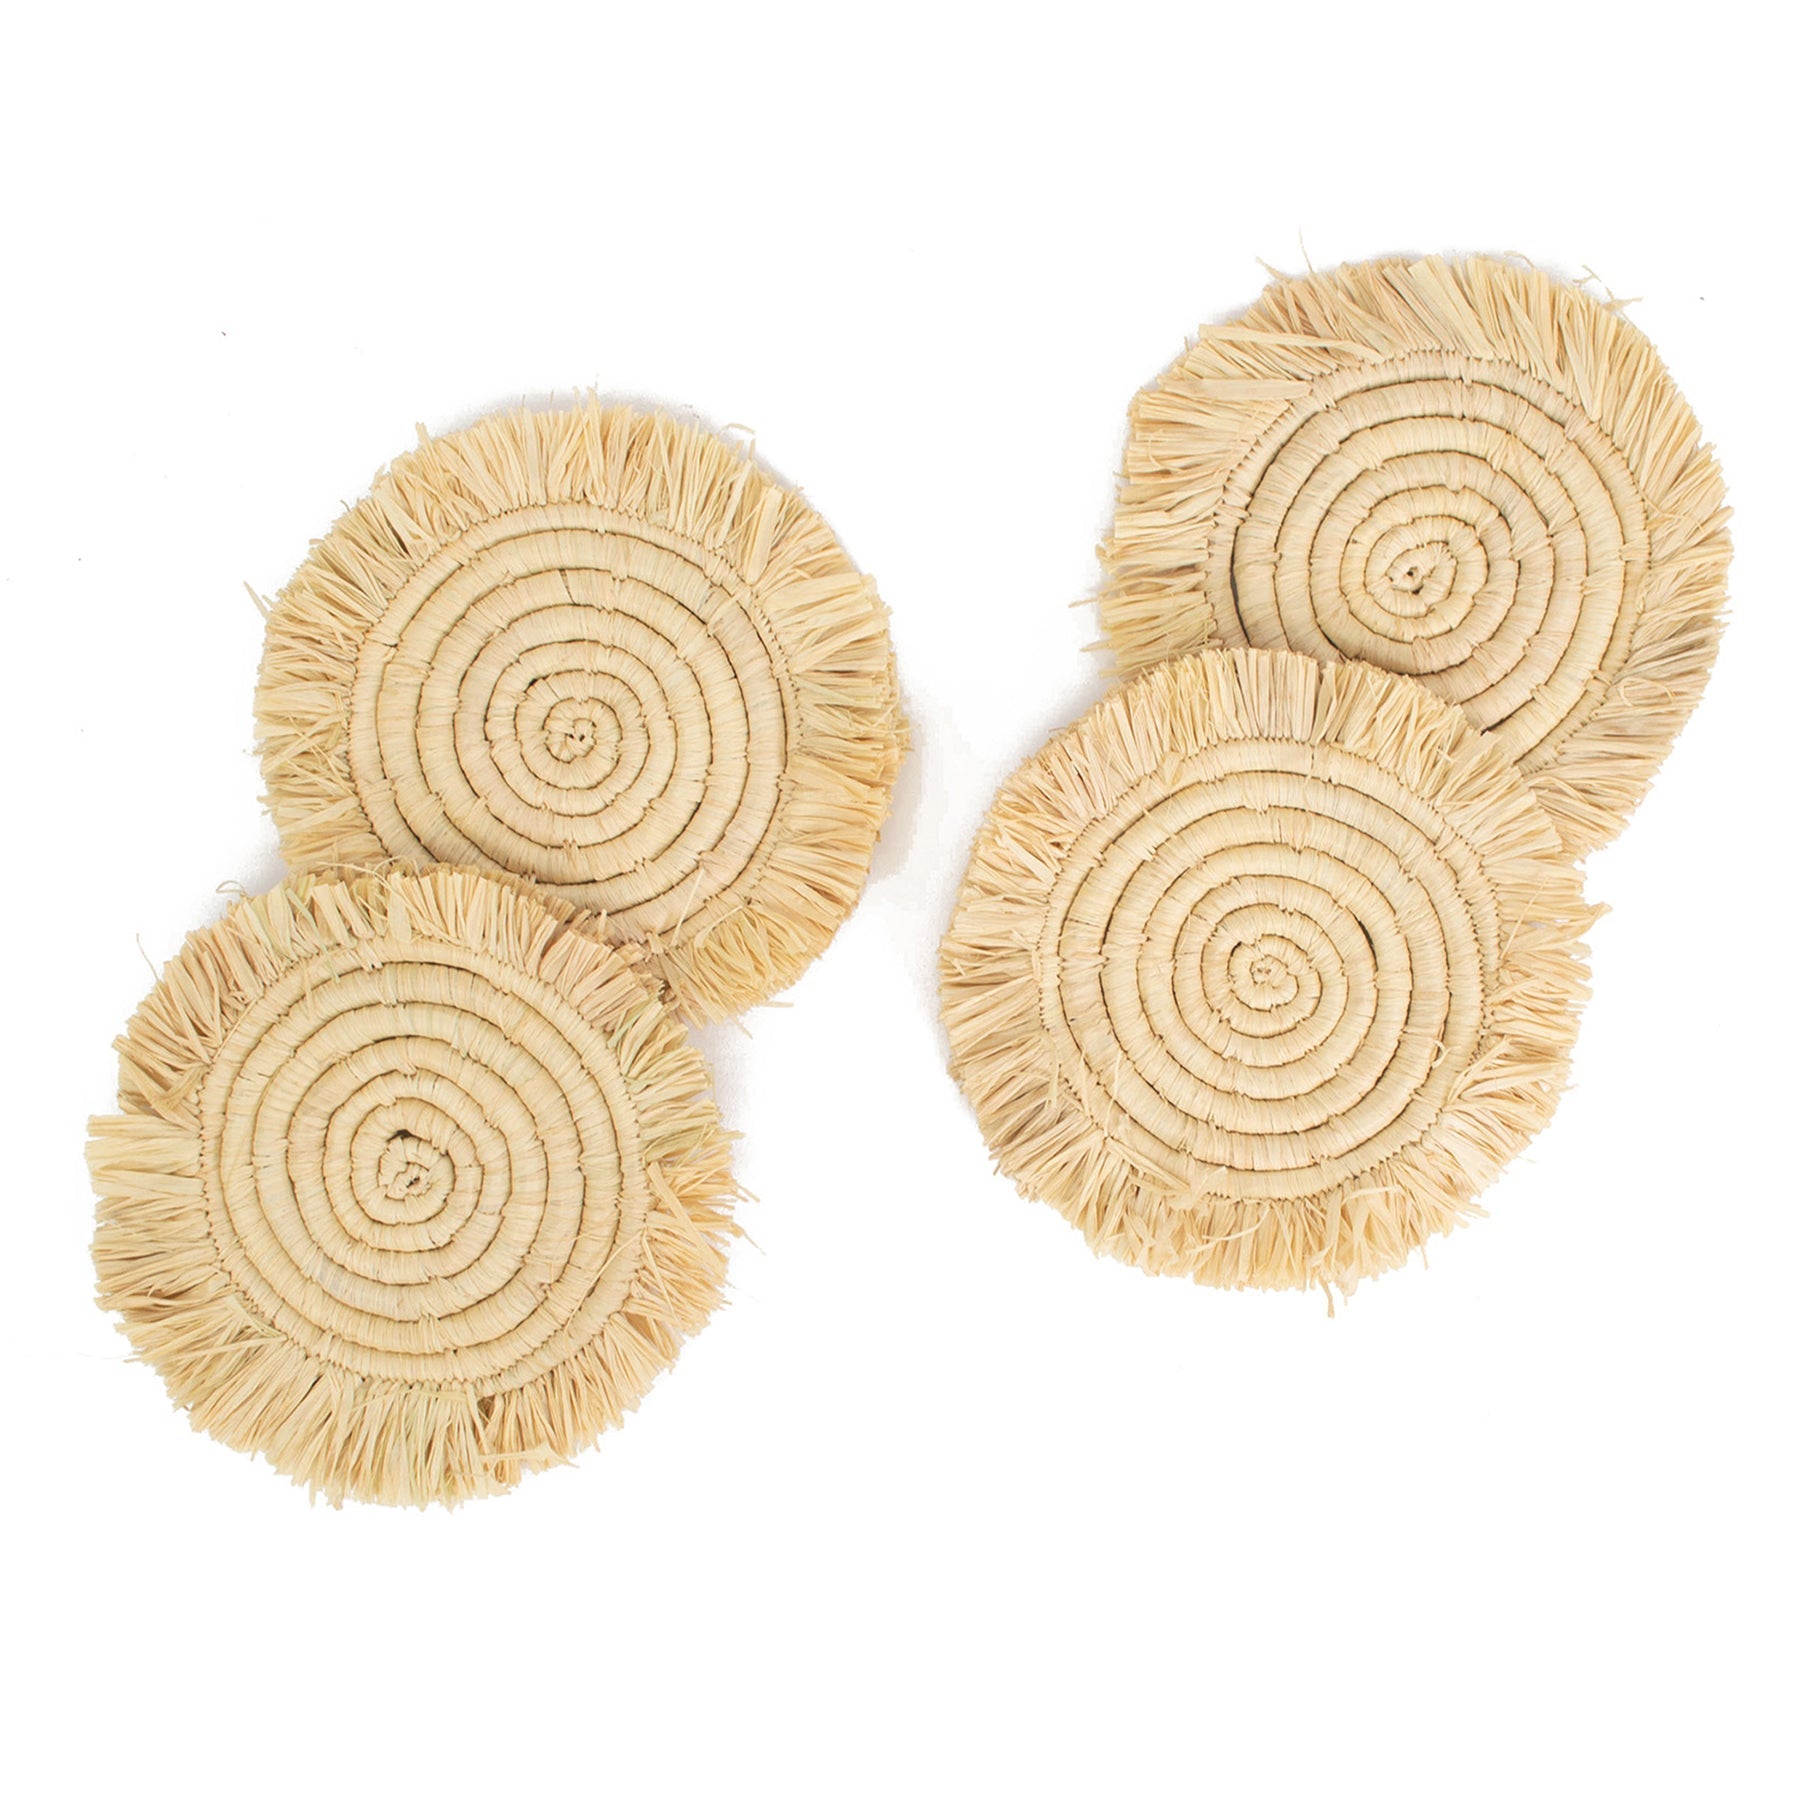  Neutral Fringed Coasters - Natural, Set of 4 by Kazi Goods - Wholesale Kazi Goods - Wholesale Perfumarie